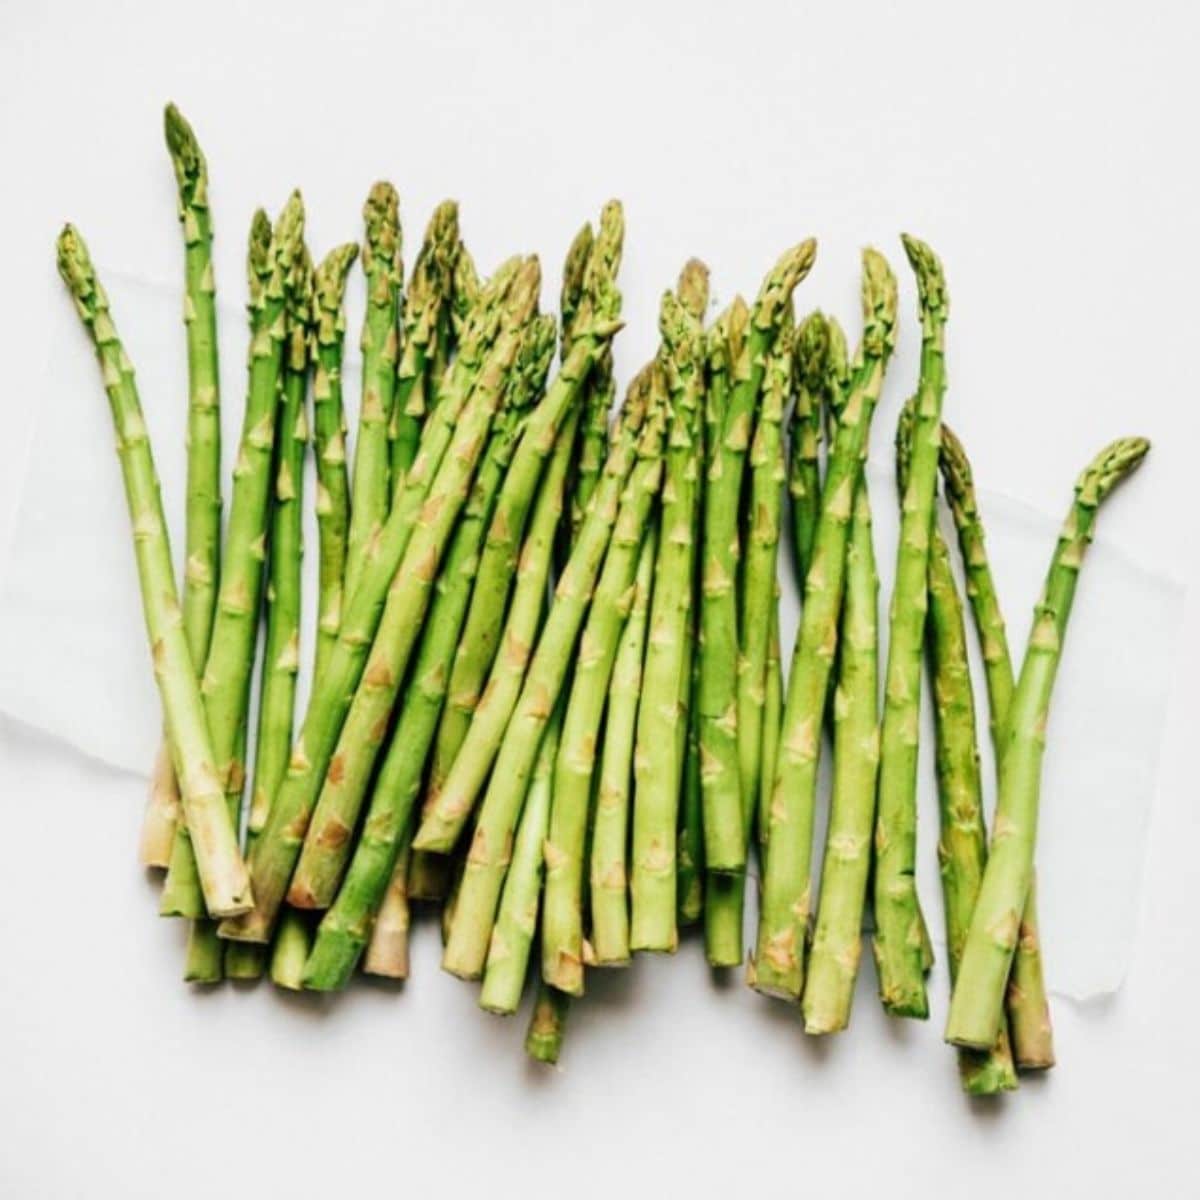 Many asparagus stems on a white background.